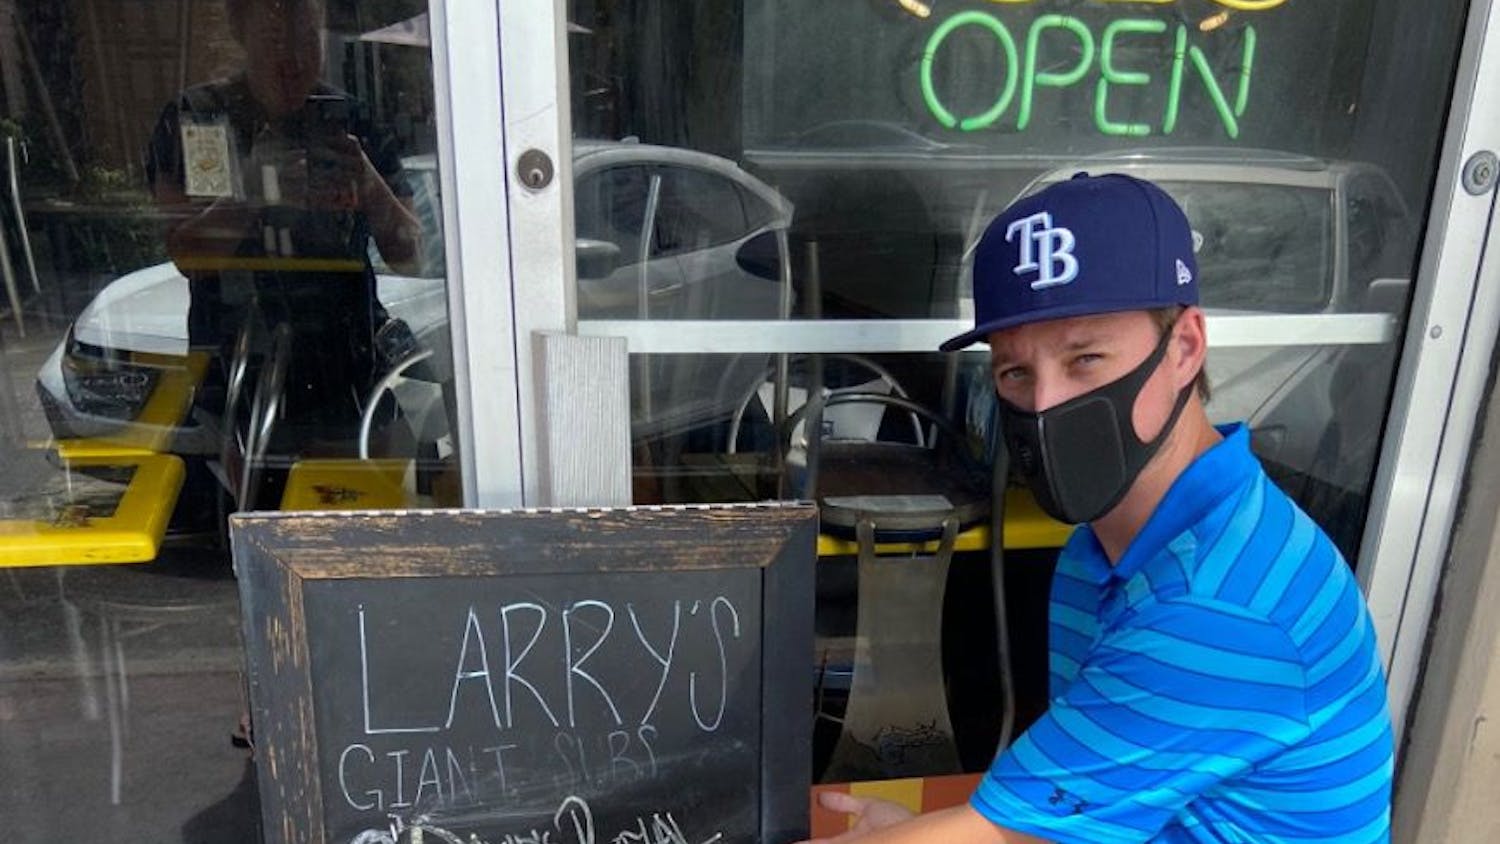 One customer, in particular, UF alumni David Steinfeldt, has been going to Larry’s since his junior year at UF in 2018. Ever since his first trip there, he’s regretted not discovering it sooner, Steinfeldt said.&nbsp;